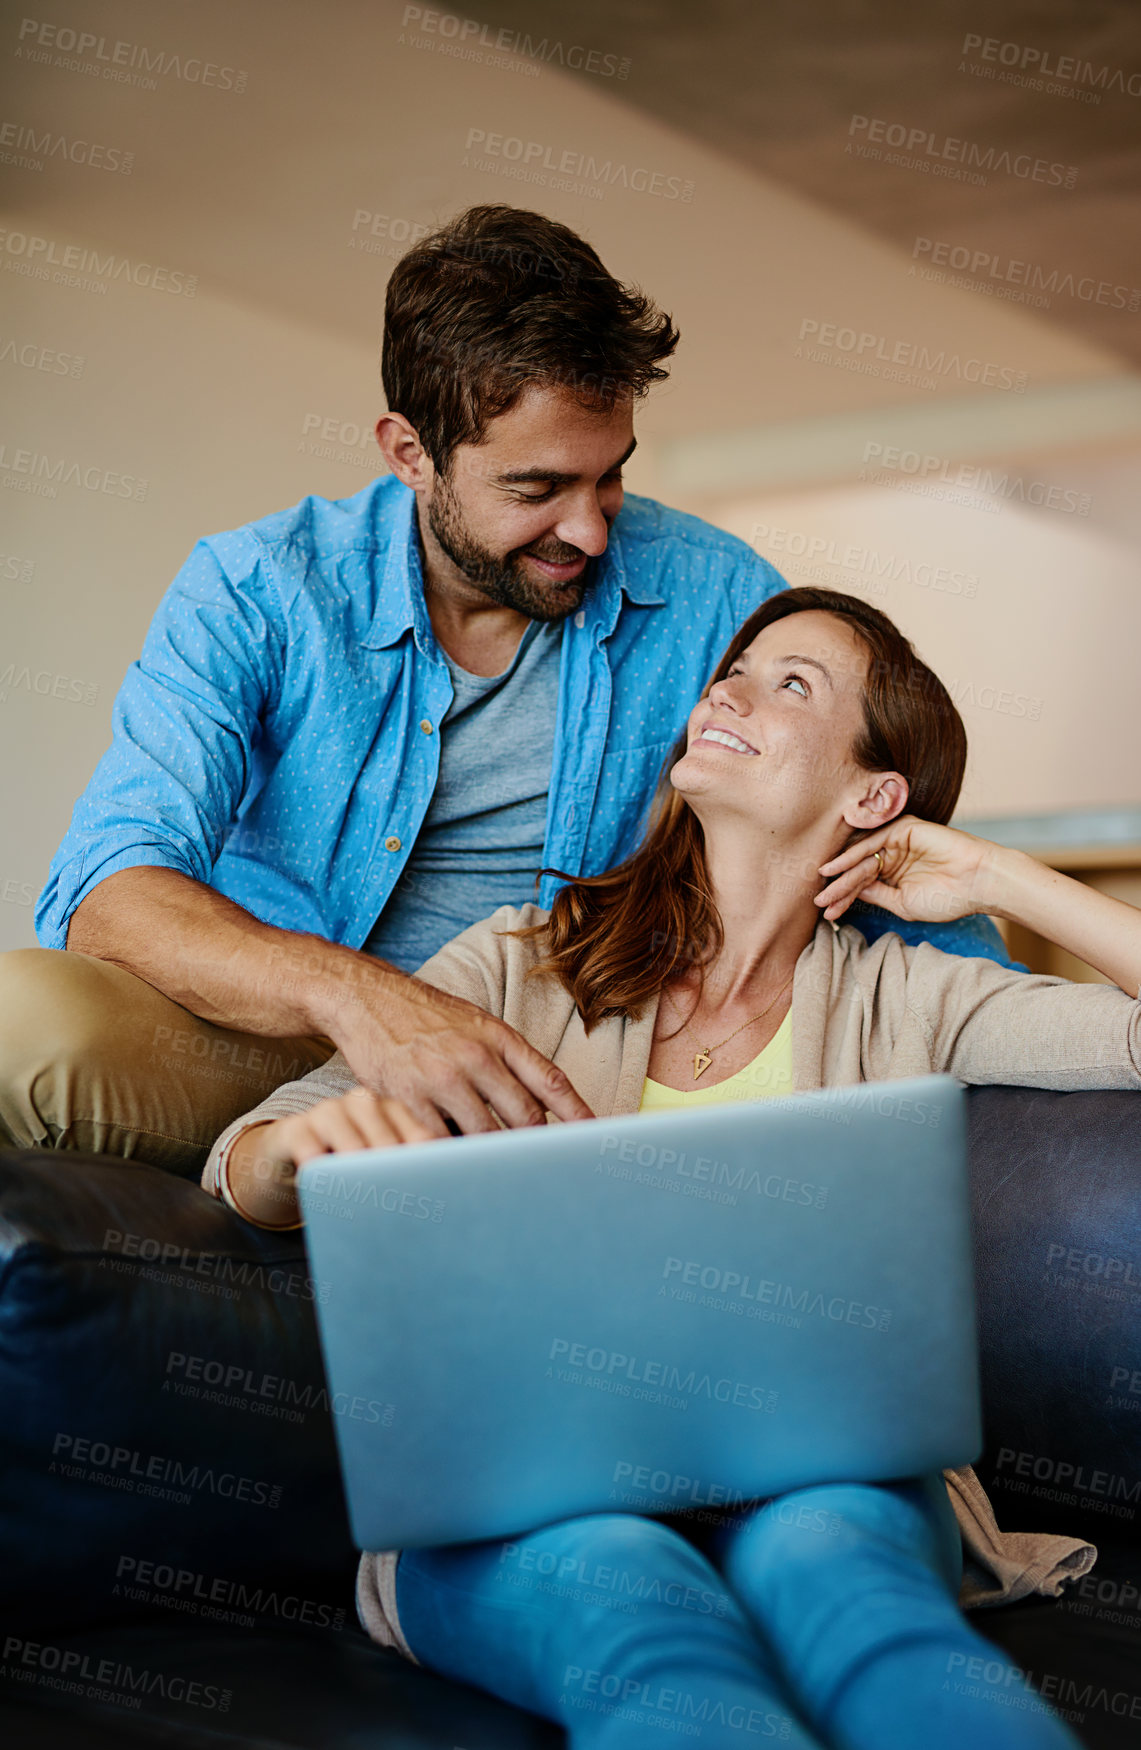 Buy stock photo Cropped shot of an affectionate young couple relaxing on the sofa at home